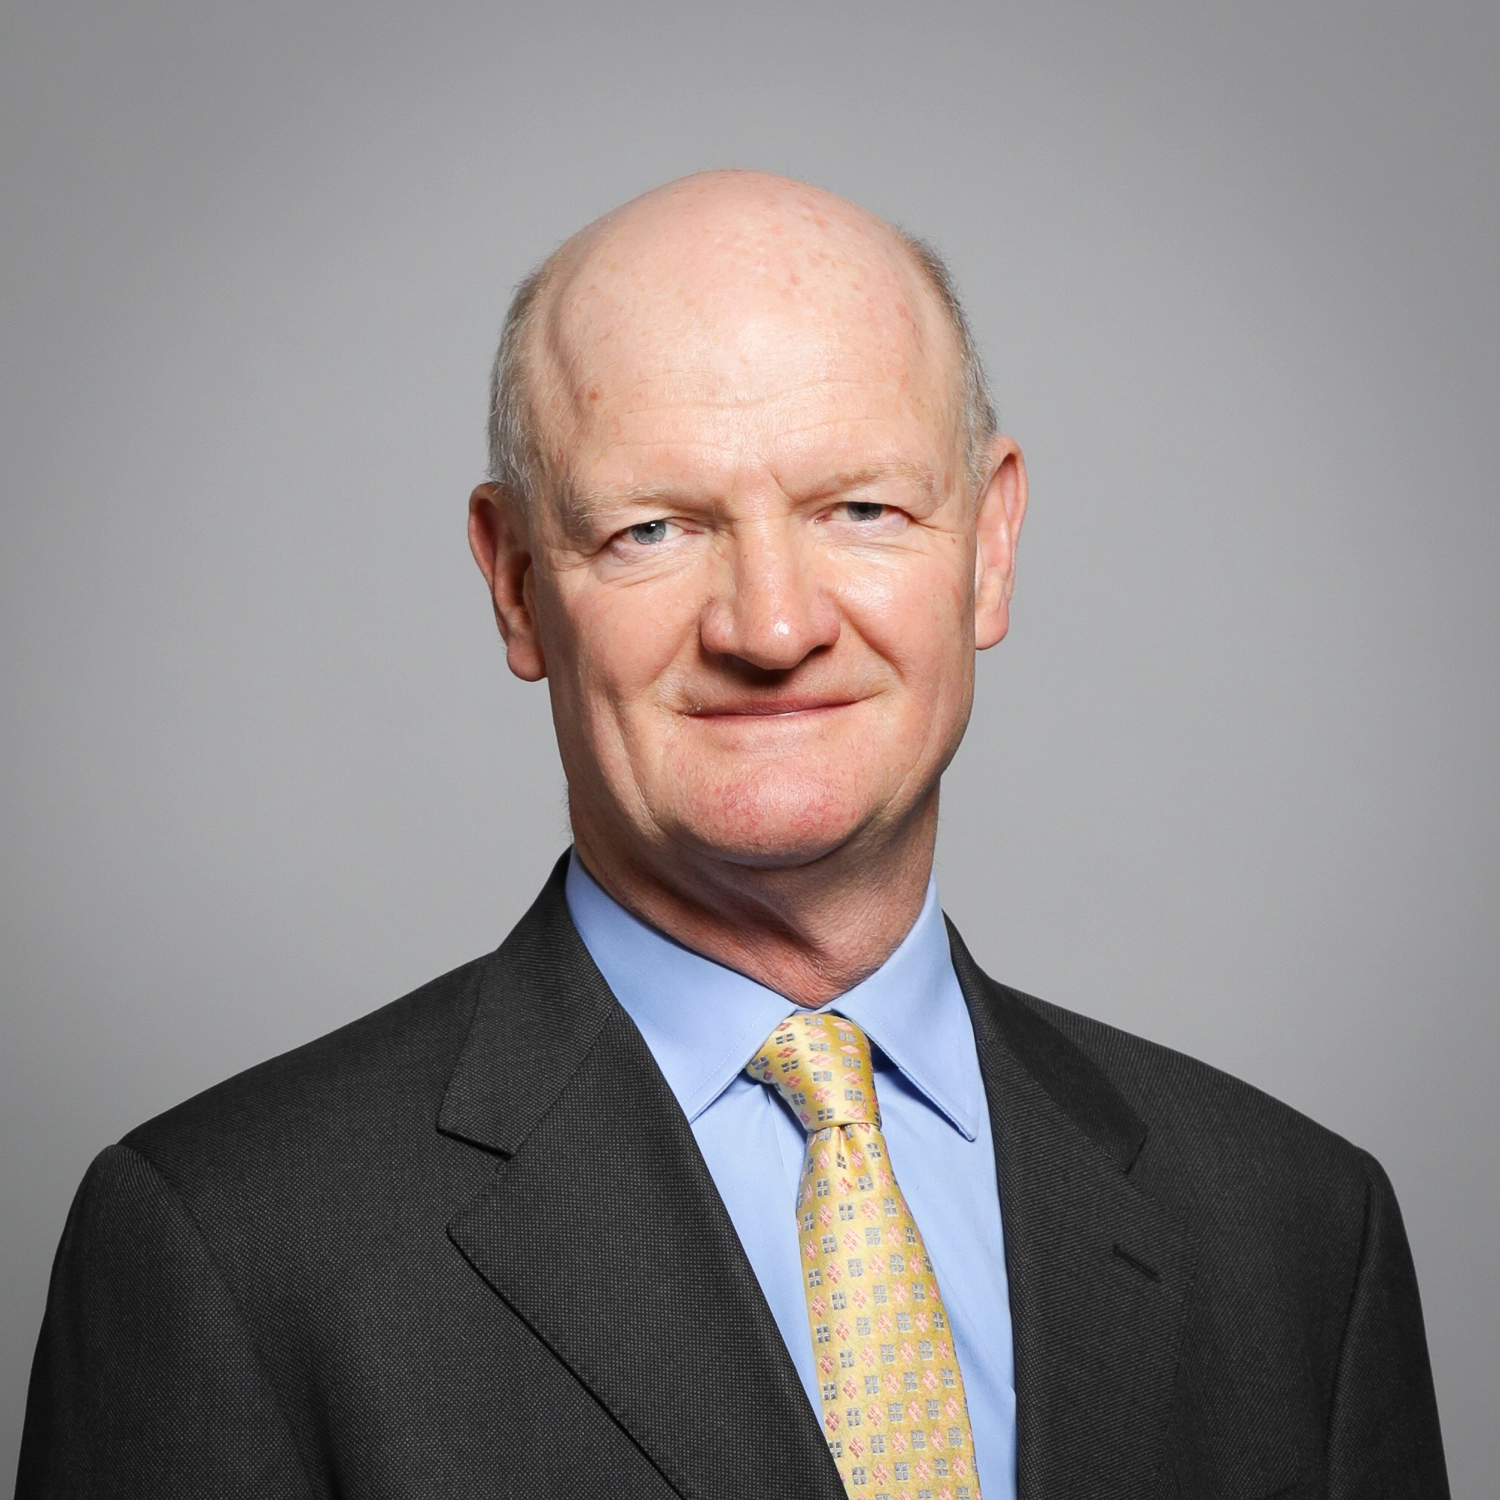 Lord Willetts